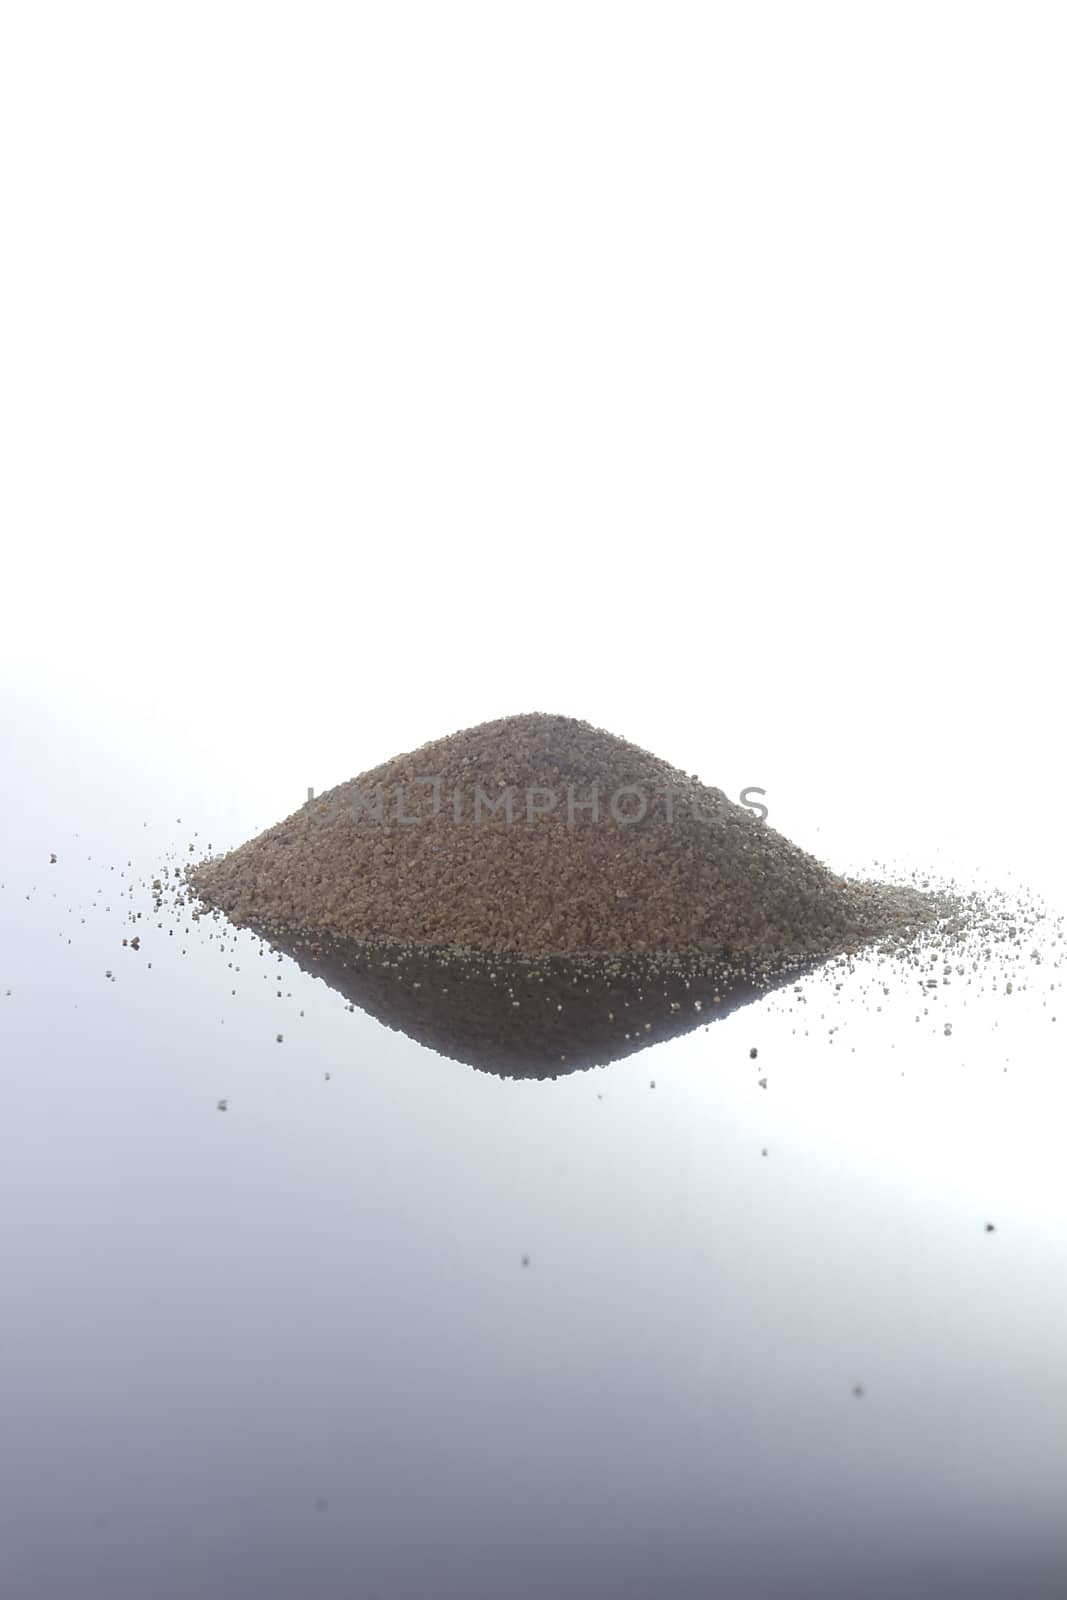 Pile of sand on a white reflective surface on a white surface